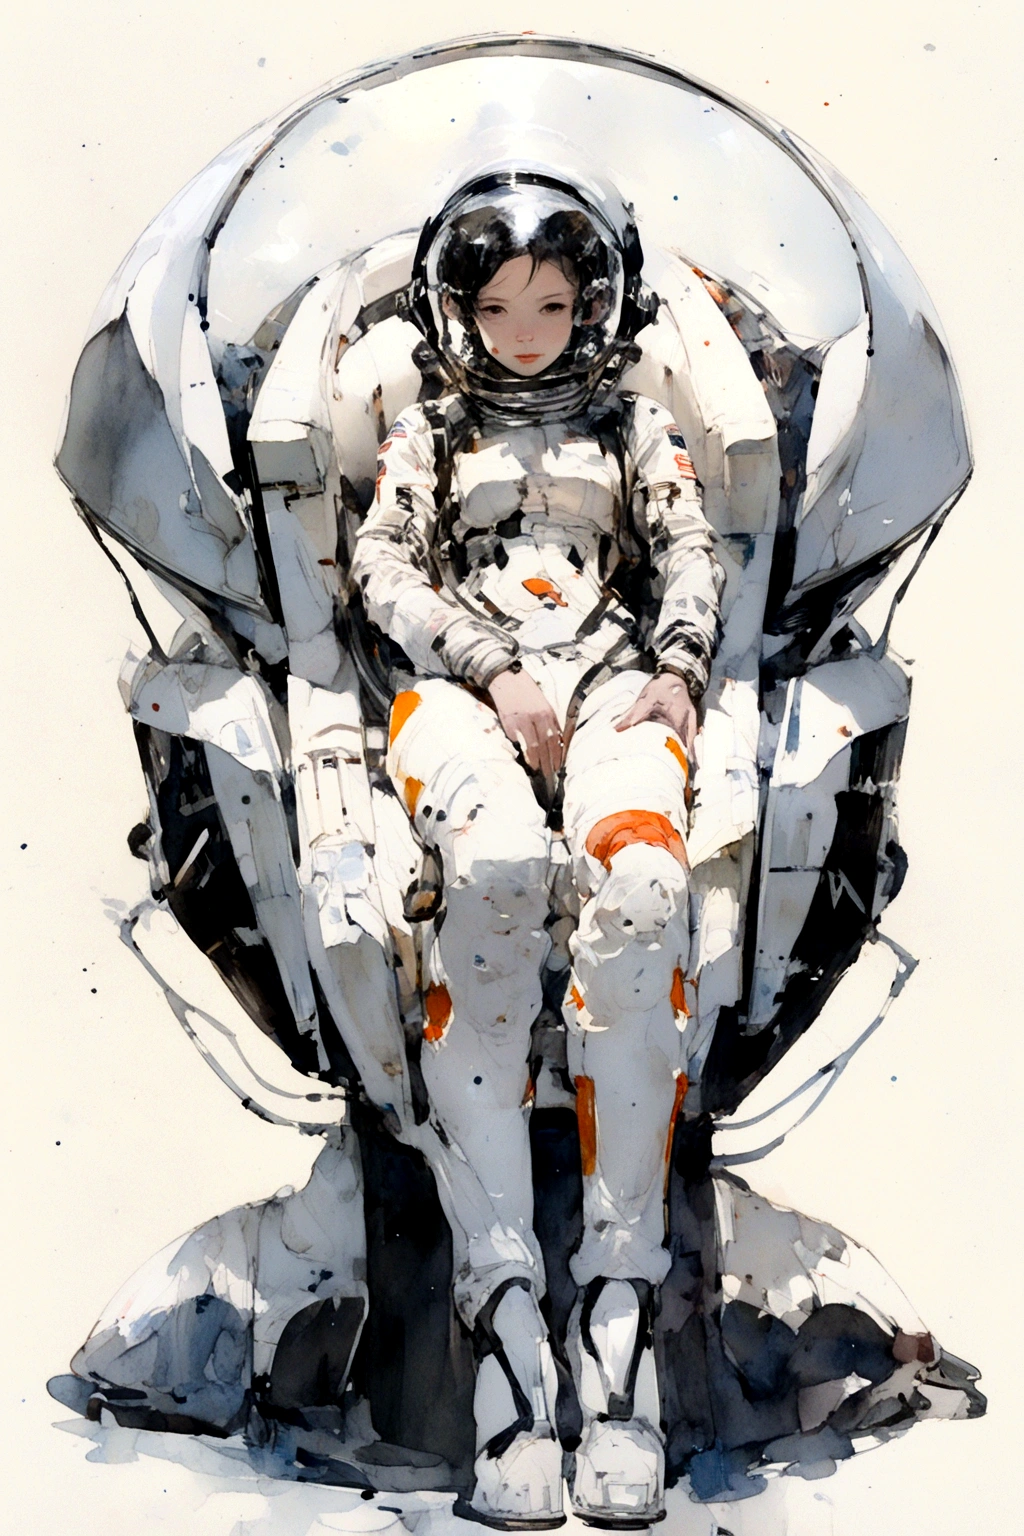 (Masterpiece: 1.2, Highest Quality), One Girl,, Change, Slim, Classic spacesuit, (, Bottomless, Naked Pussy),Astronaut, Sitting in Black Chair, Spreading Legs, Serious, Spaceship, Futuristic, Science Fiction, Space Age Design, Anime Minimalist, Watercolor, Influenced by Bauhaus 